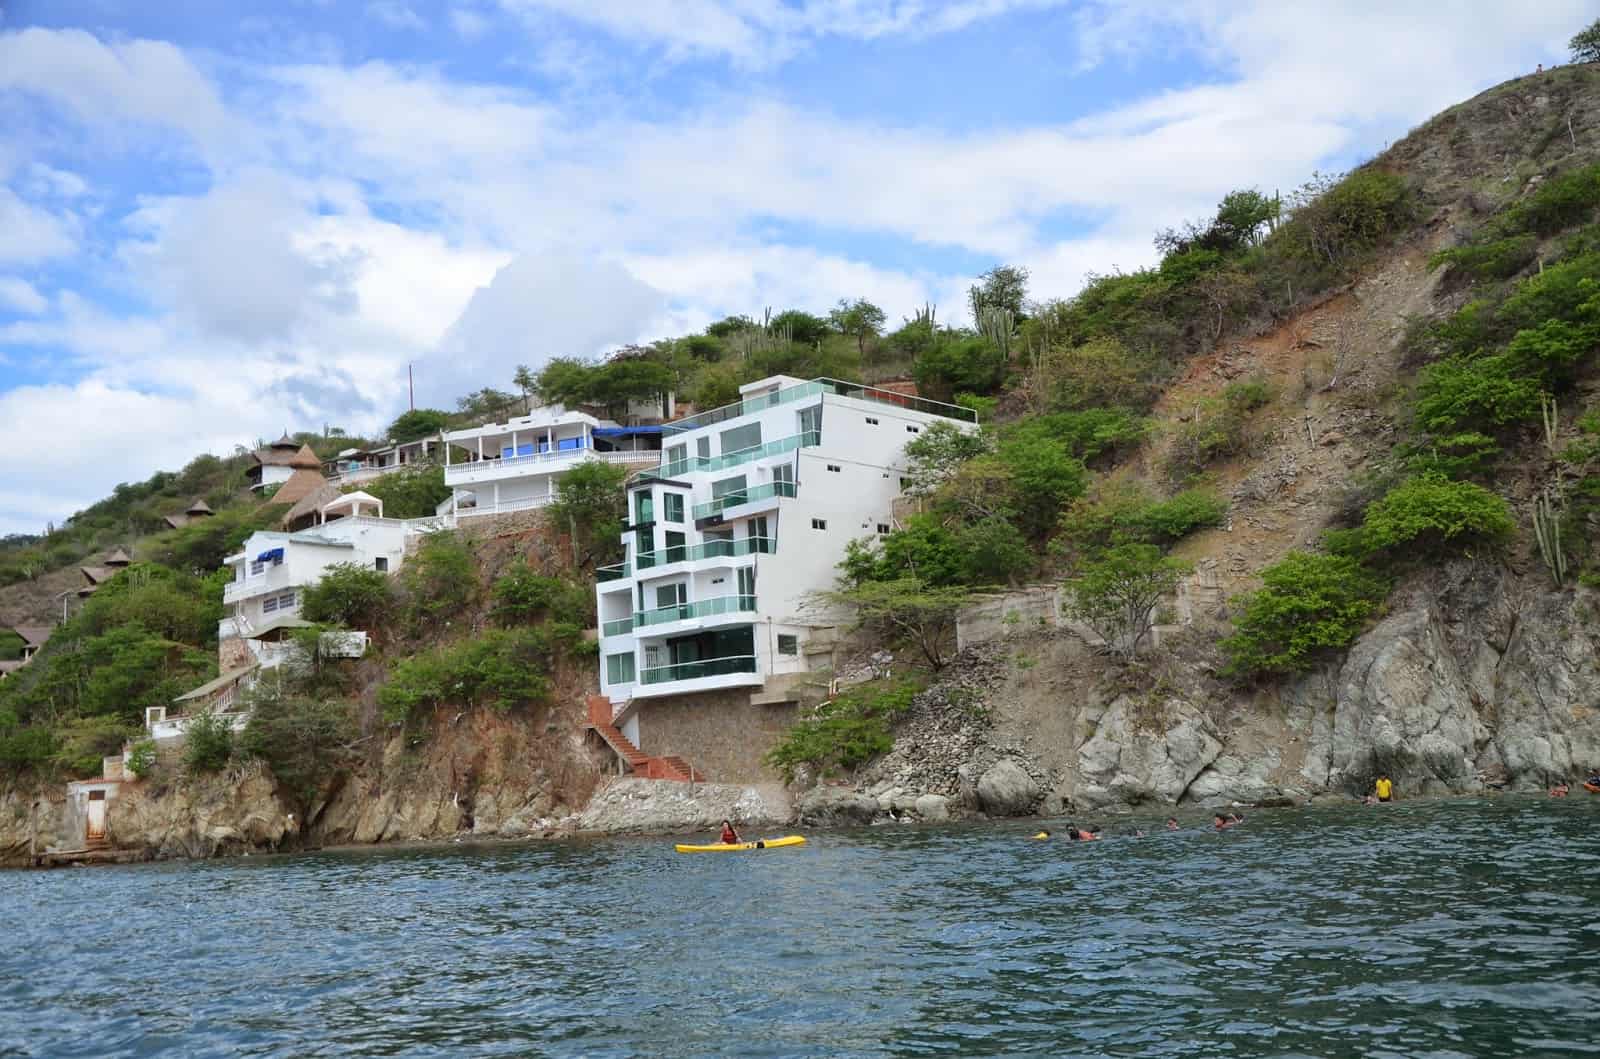 Home on the boat ride to Playa Grande in Taganga, Magdalena, Colombia